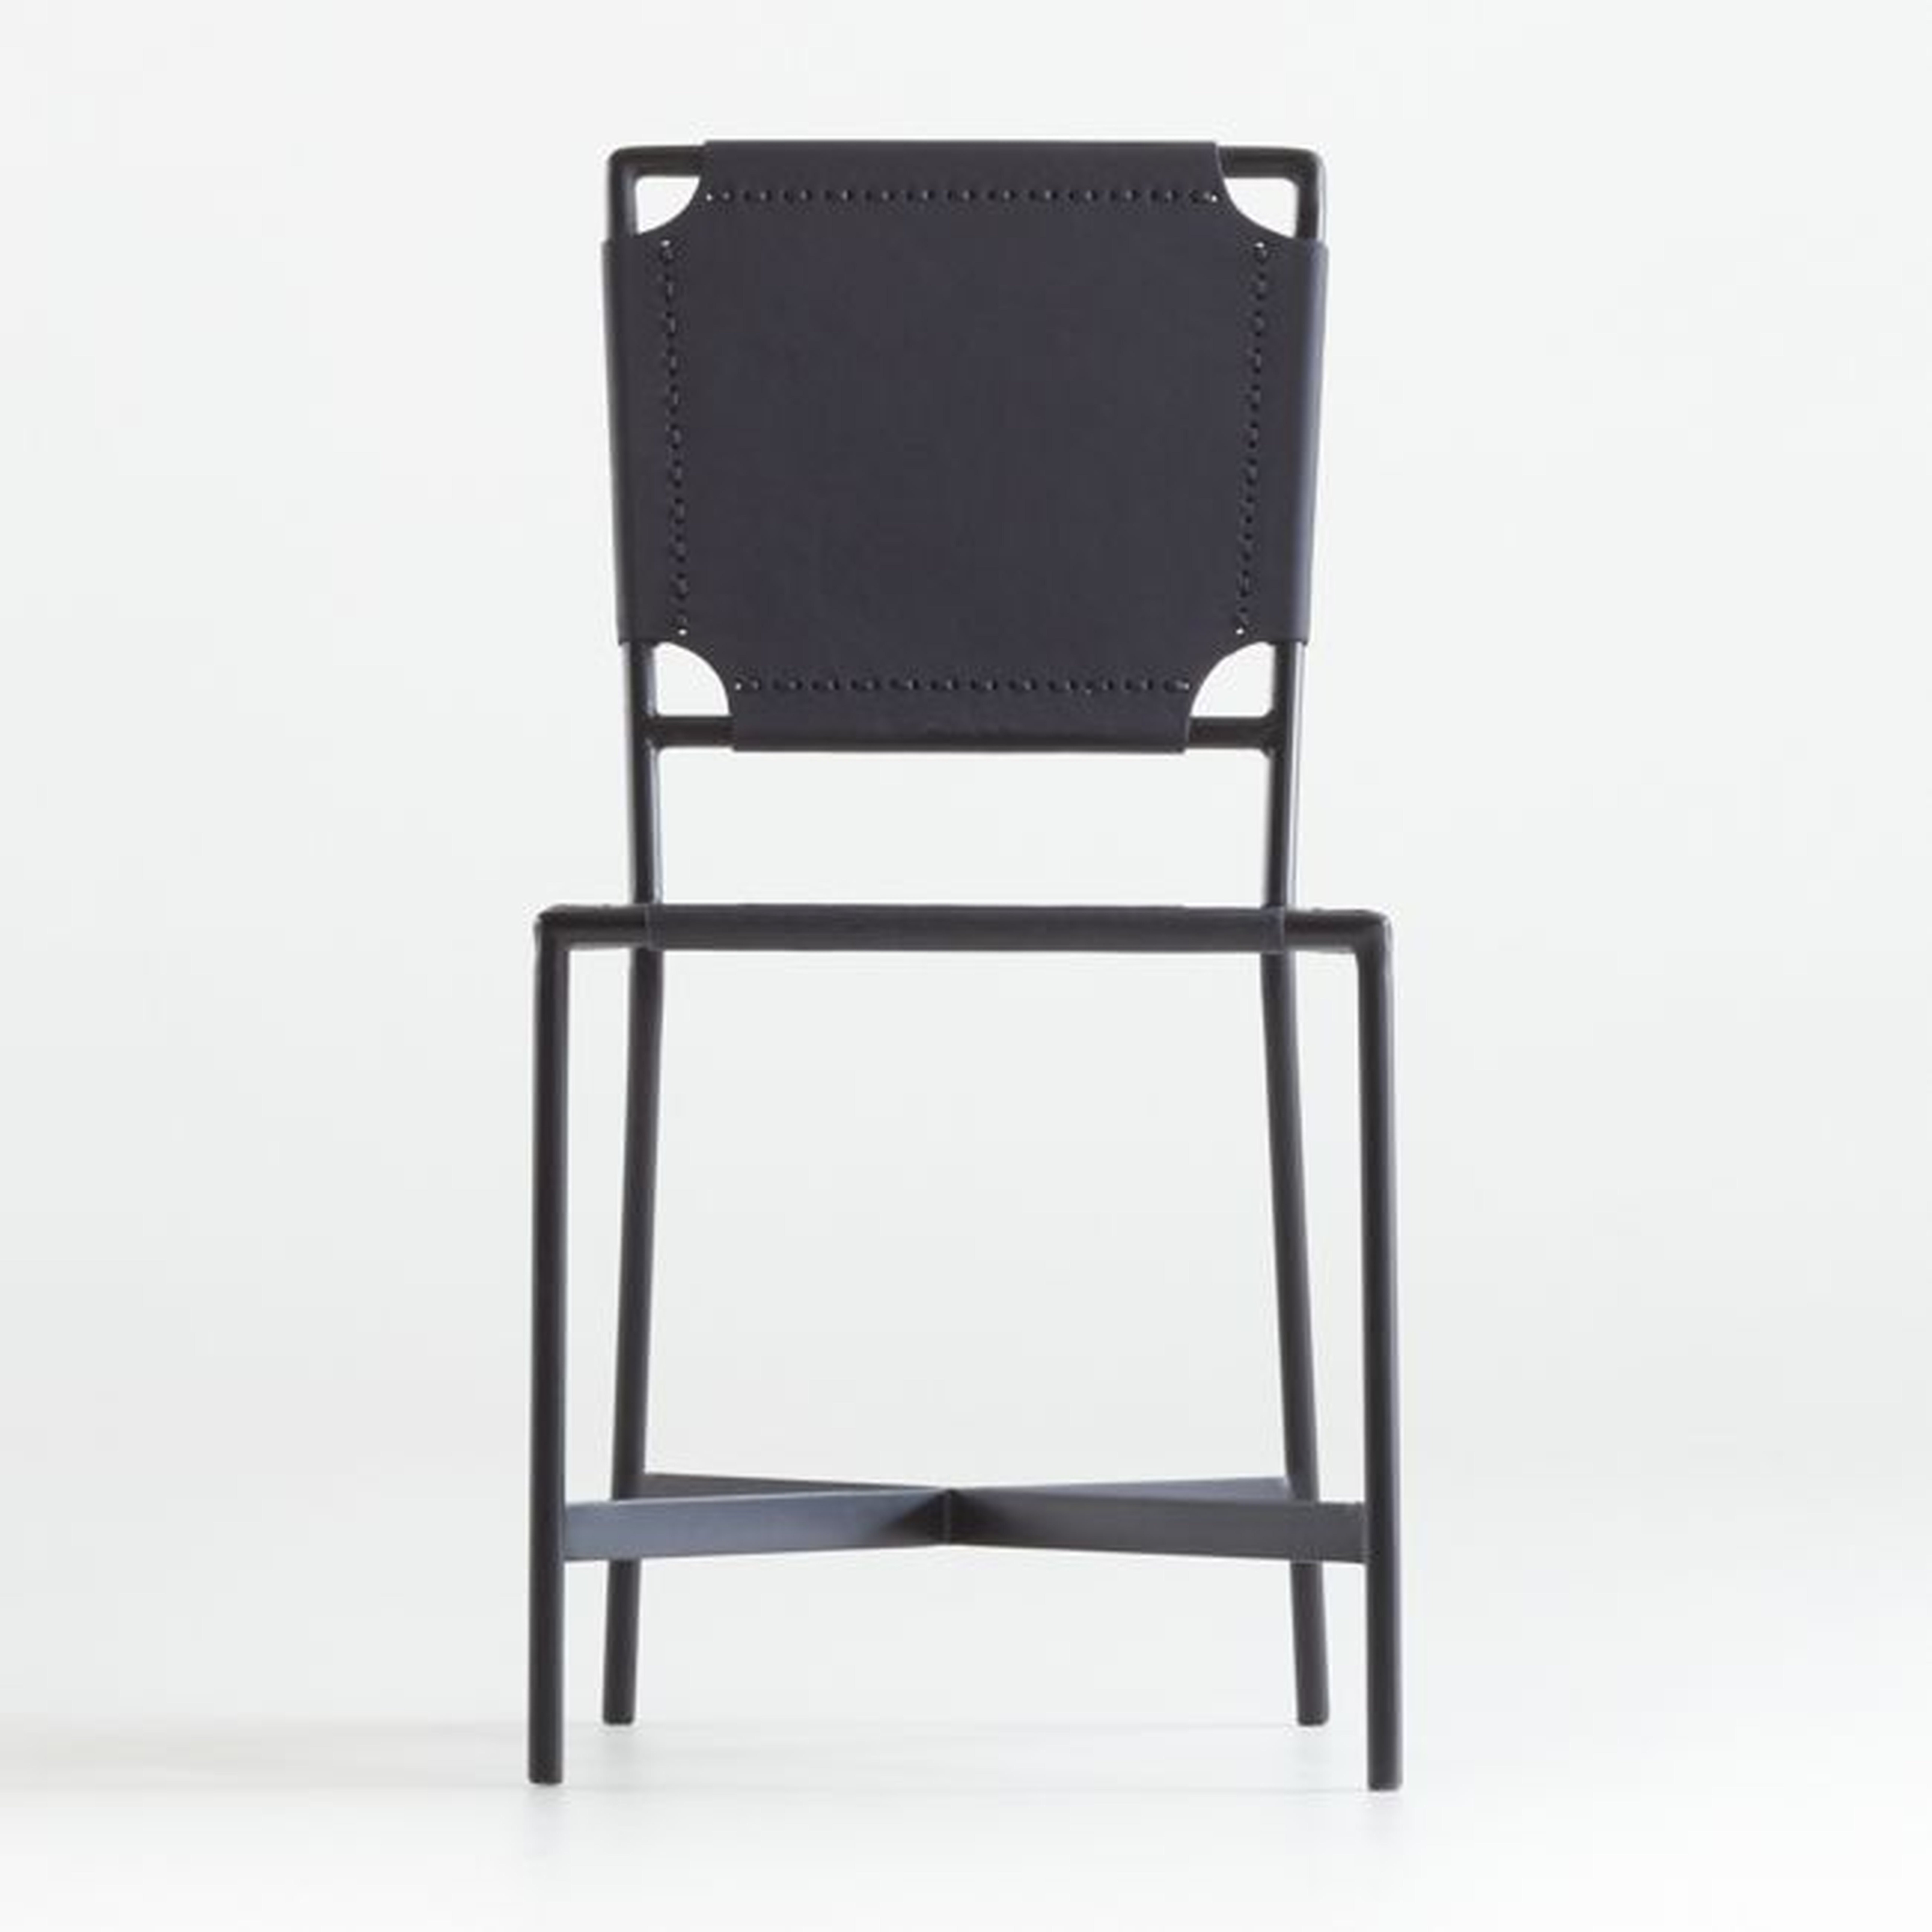 Laredo Black Leather Dining Chair - Crate and Barrel